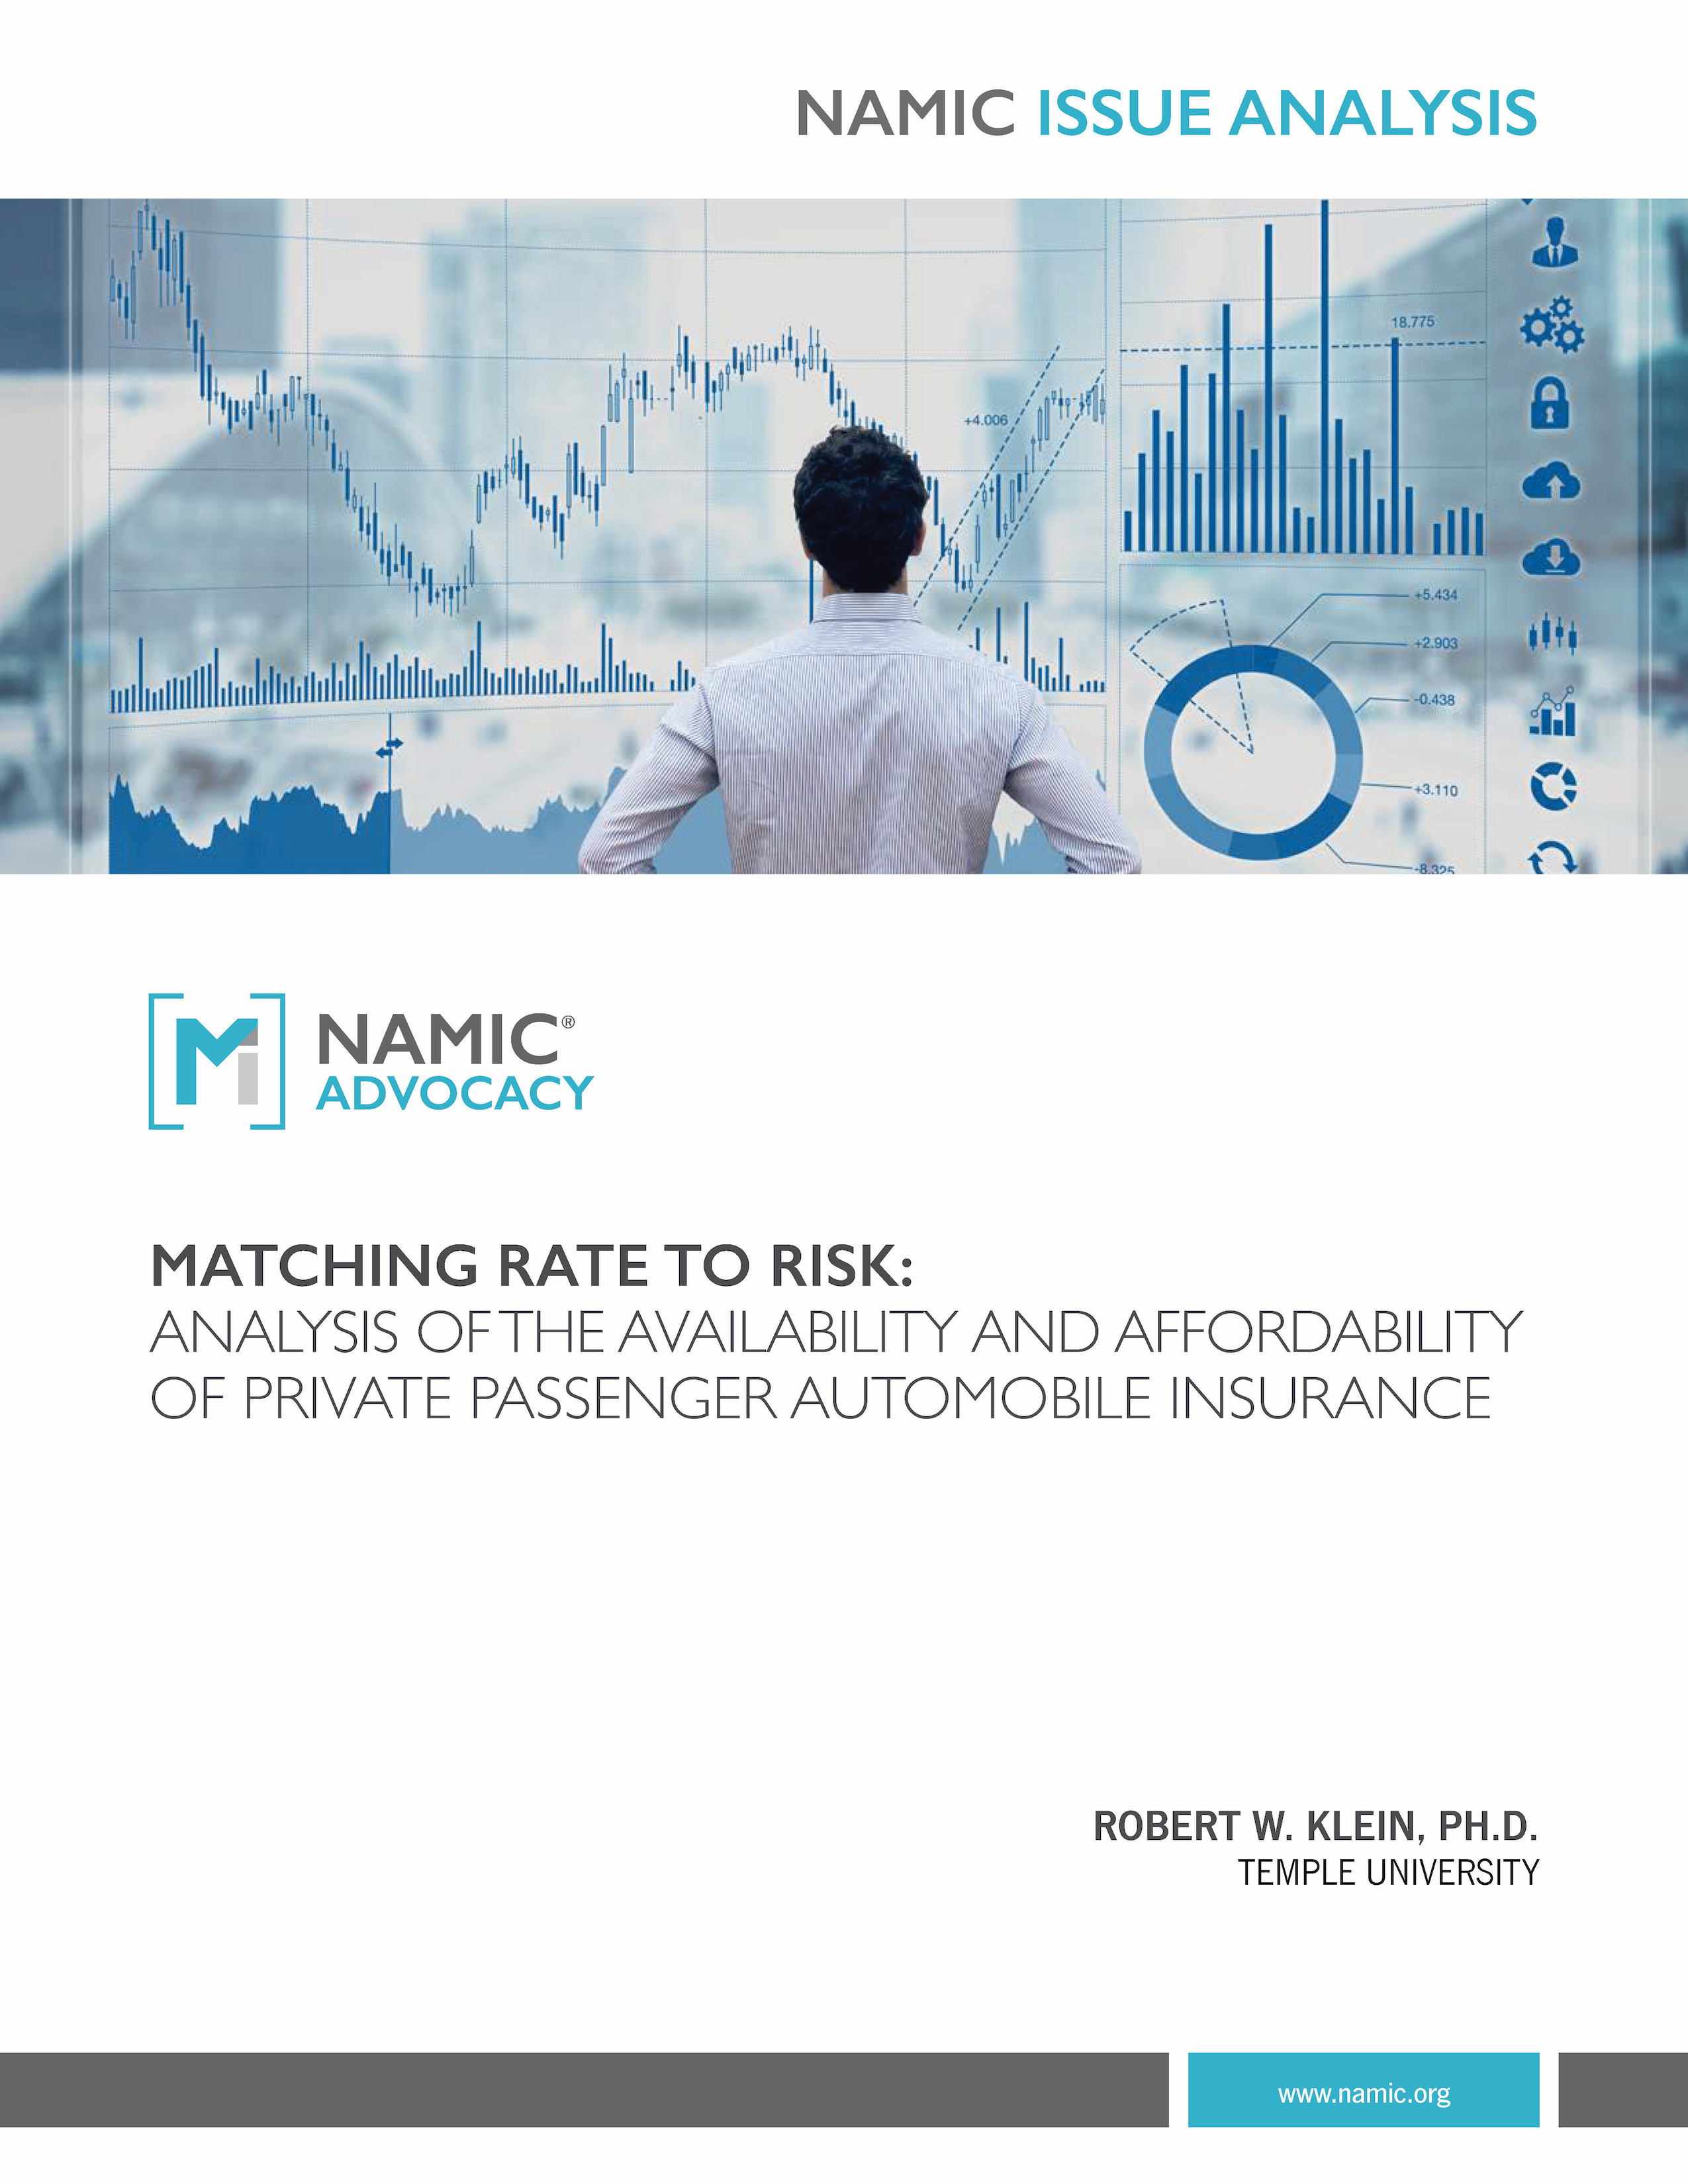 Matching Rate to Risk: Analysis of the Availability and Affordability of Private Passenger Automobile Insurance PDF